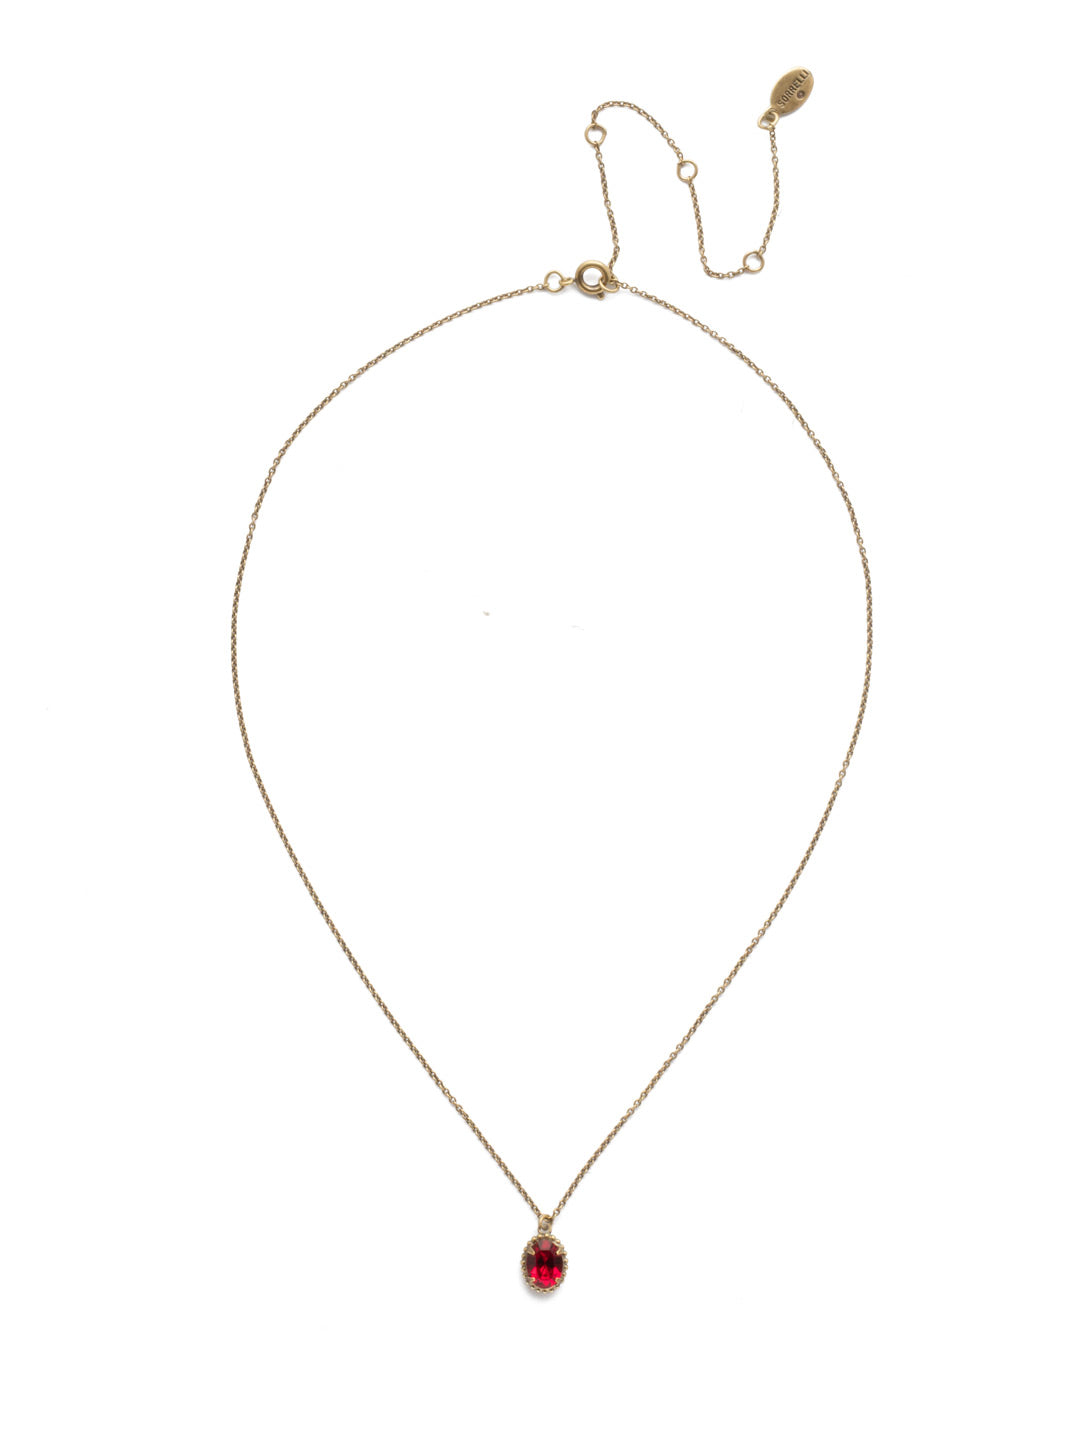 Maisie Pendant Necklace - NEF49AGSNR - This is the perfect day-to-night sparkling tiny pendant necklace that has an adjustable chain to fit your neckline. From Sorrelli's Sansa Red collection in our Antique Gold-tone finish.